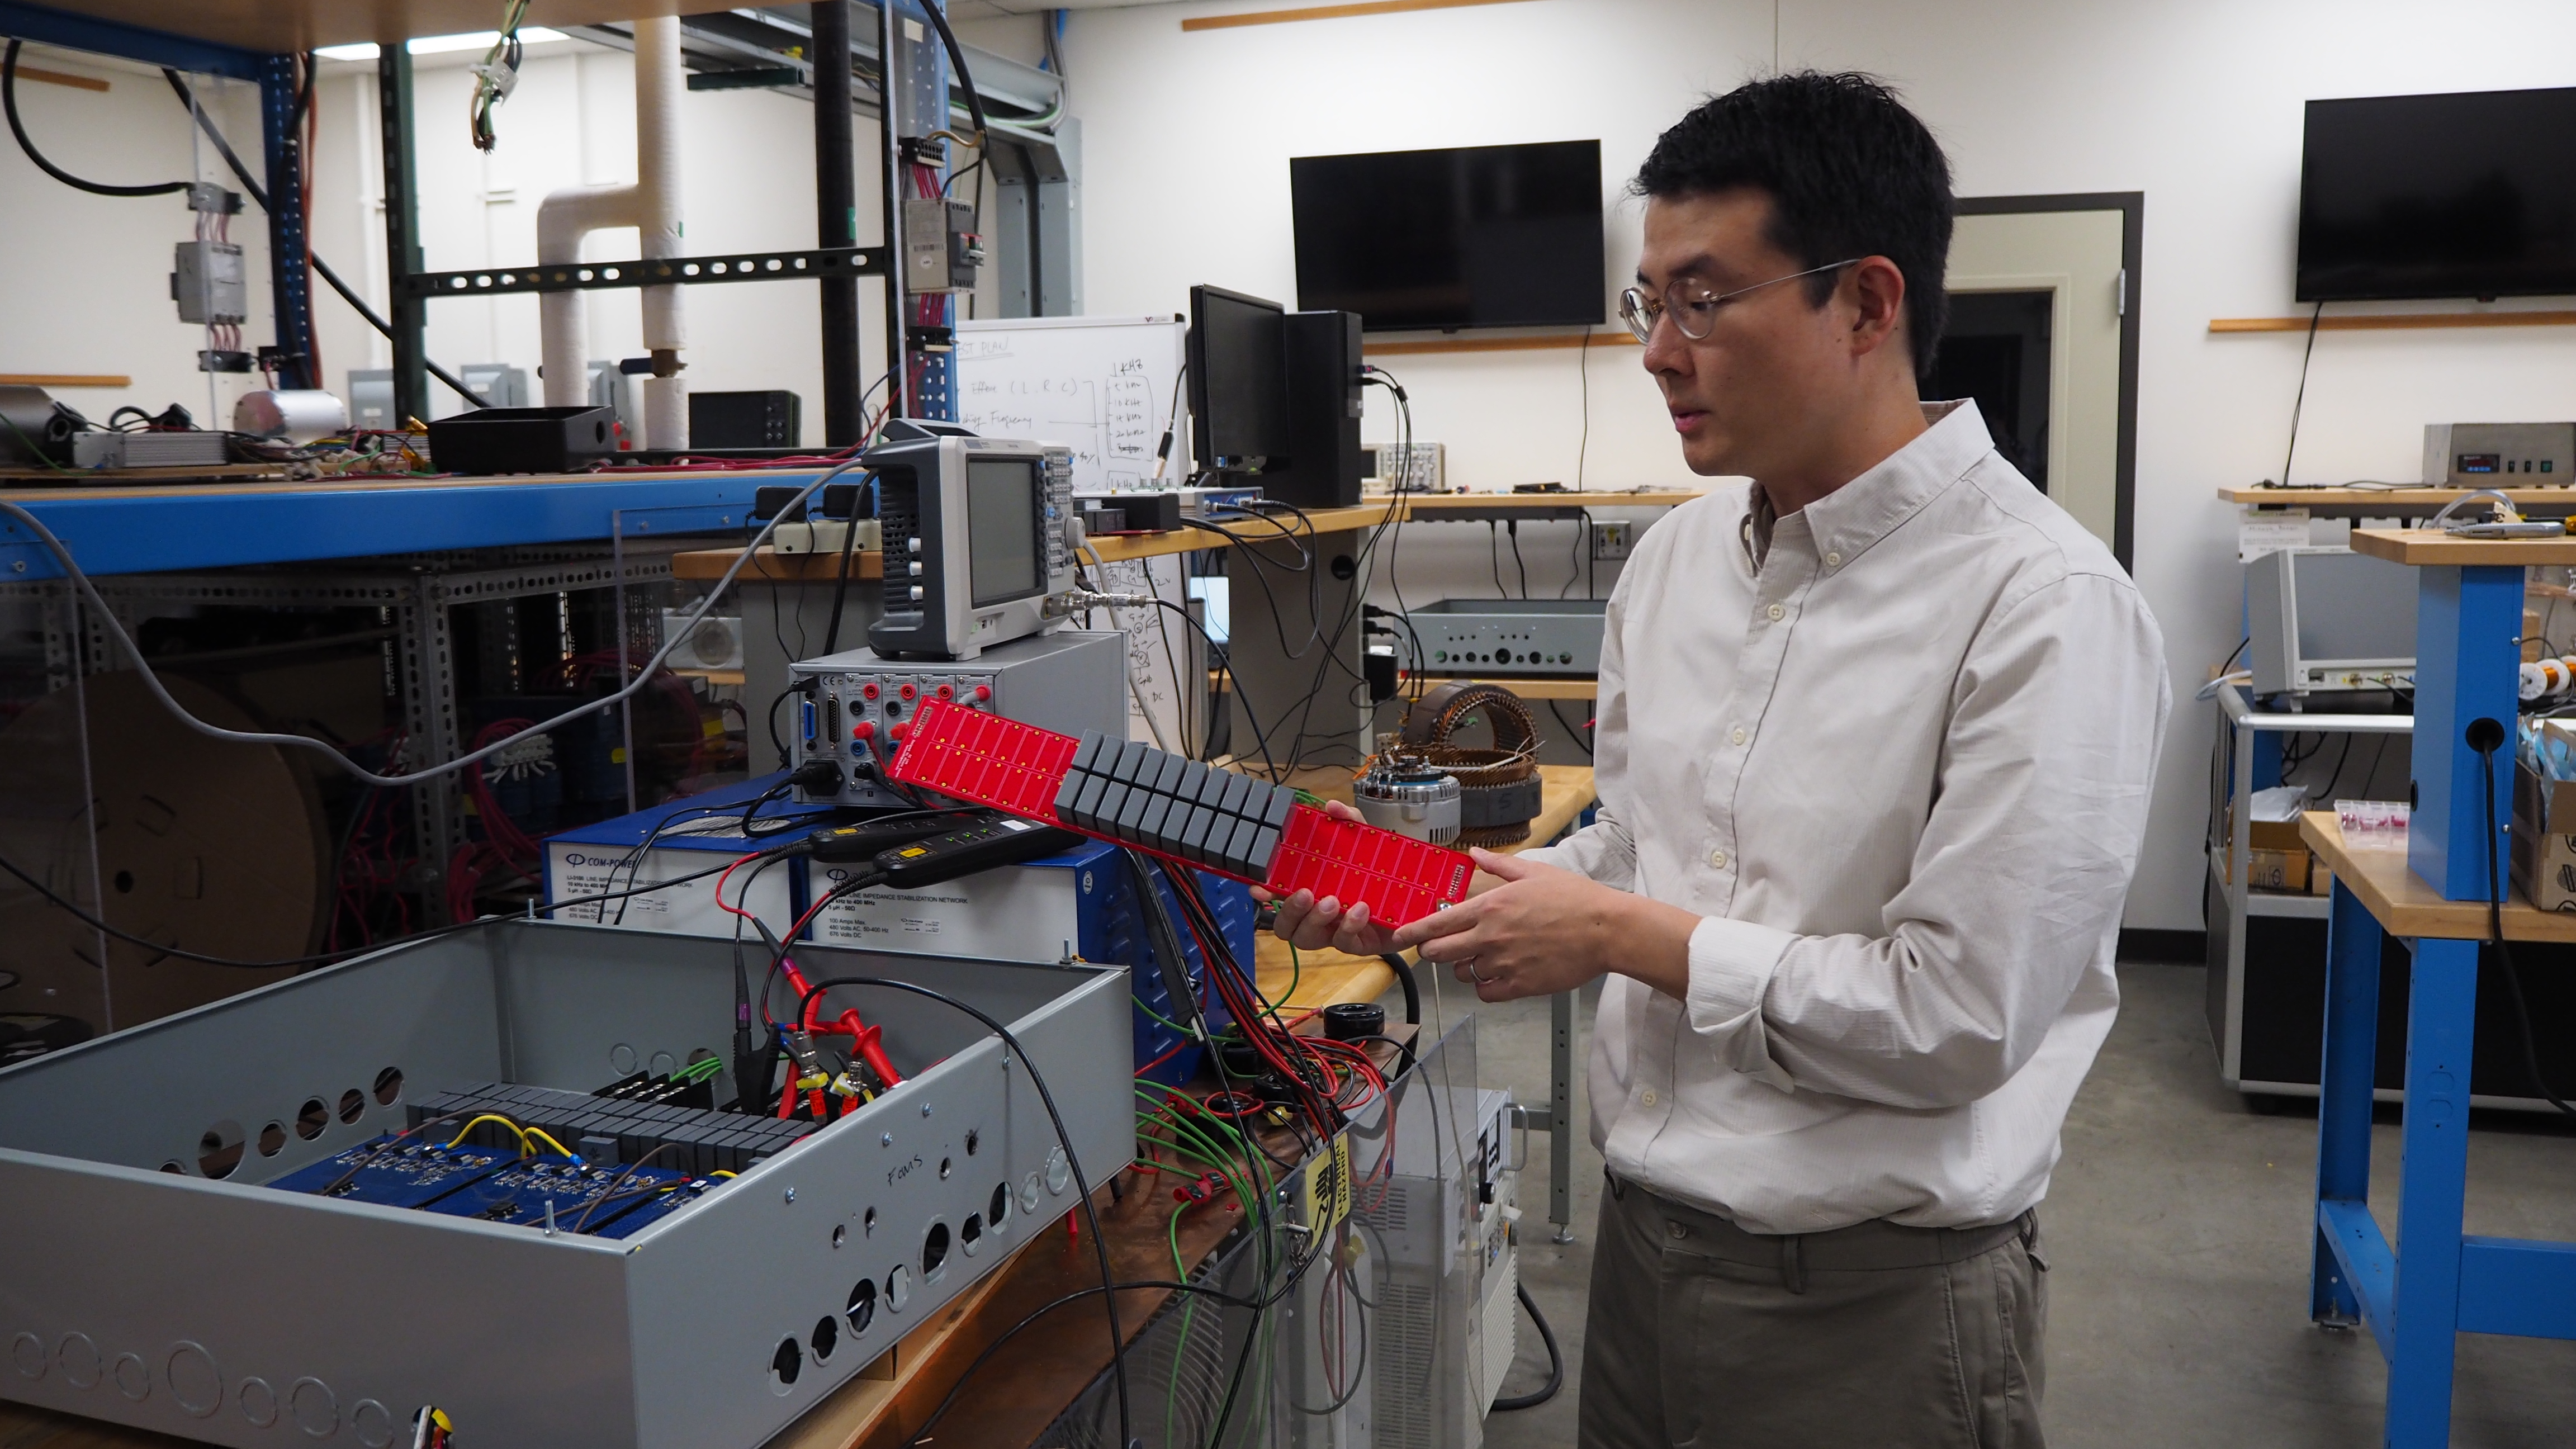 Woongkul “Matt” Lee stands next to an open metal box, about the size of a large sheet cake, filled with wires and electronic components. He holds one of those components — a narrow red board with about 20 small gray capacitors mounted to it — for a better look.